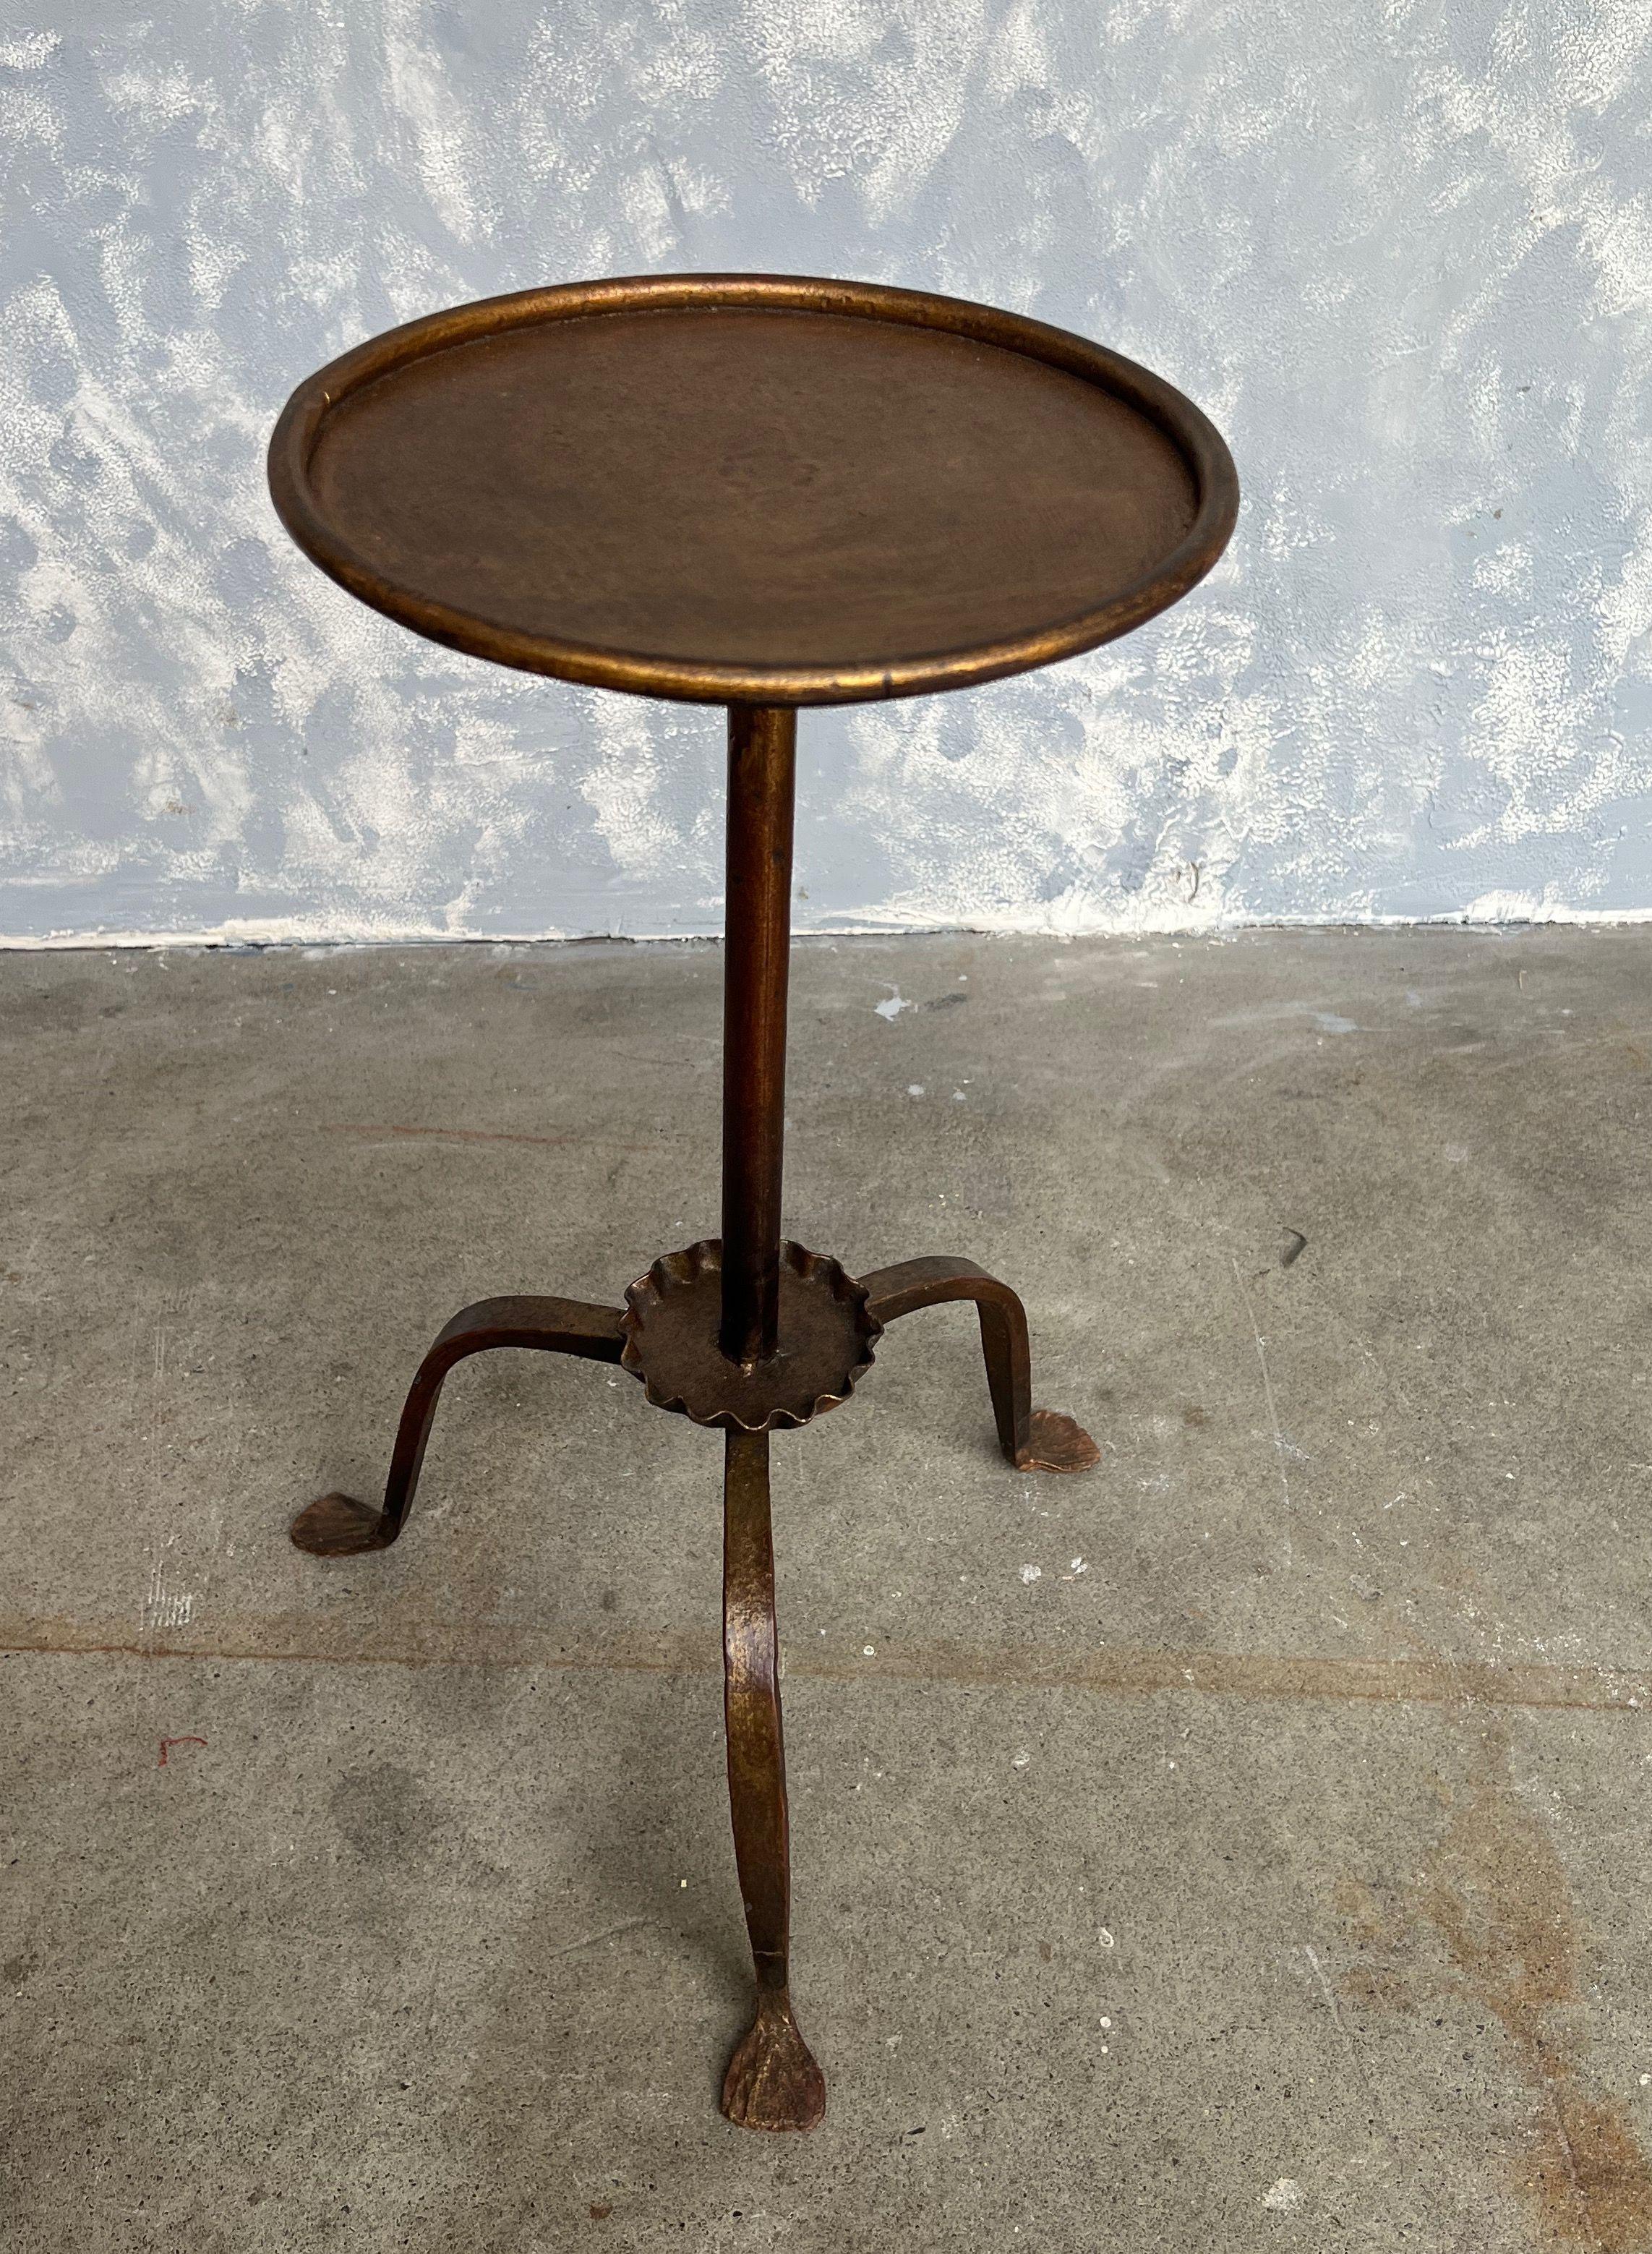 This gilt iron drinks table is replete with elegance, featuring a unique ruffled bobeche that artfully connects the round top, encased in a rolled frame, to the simple yet graceful tripod base. The original finish is a hand-applied gold patina with